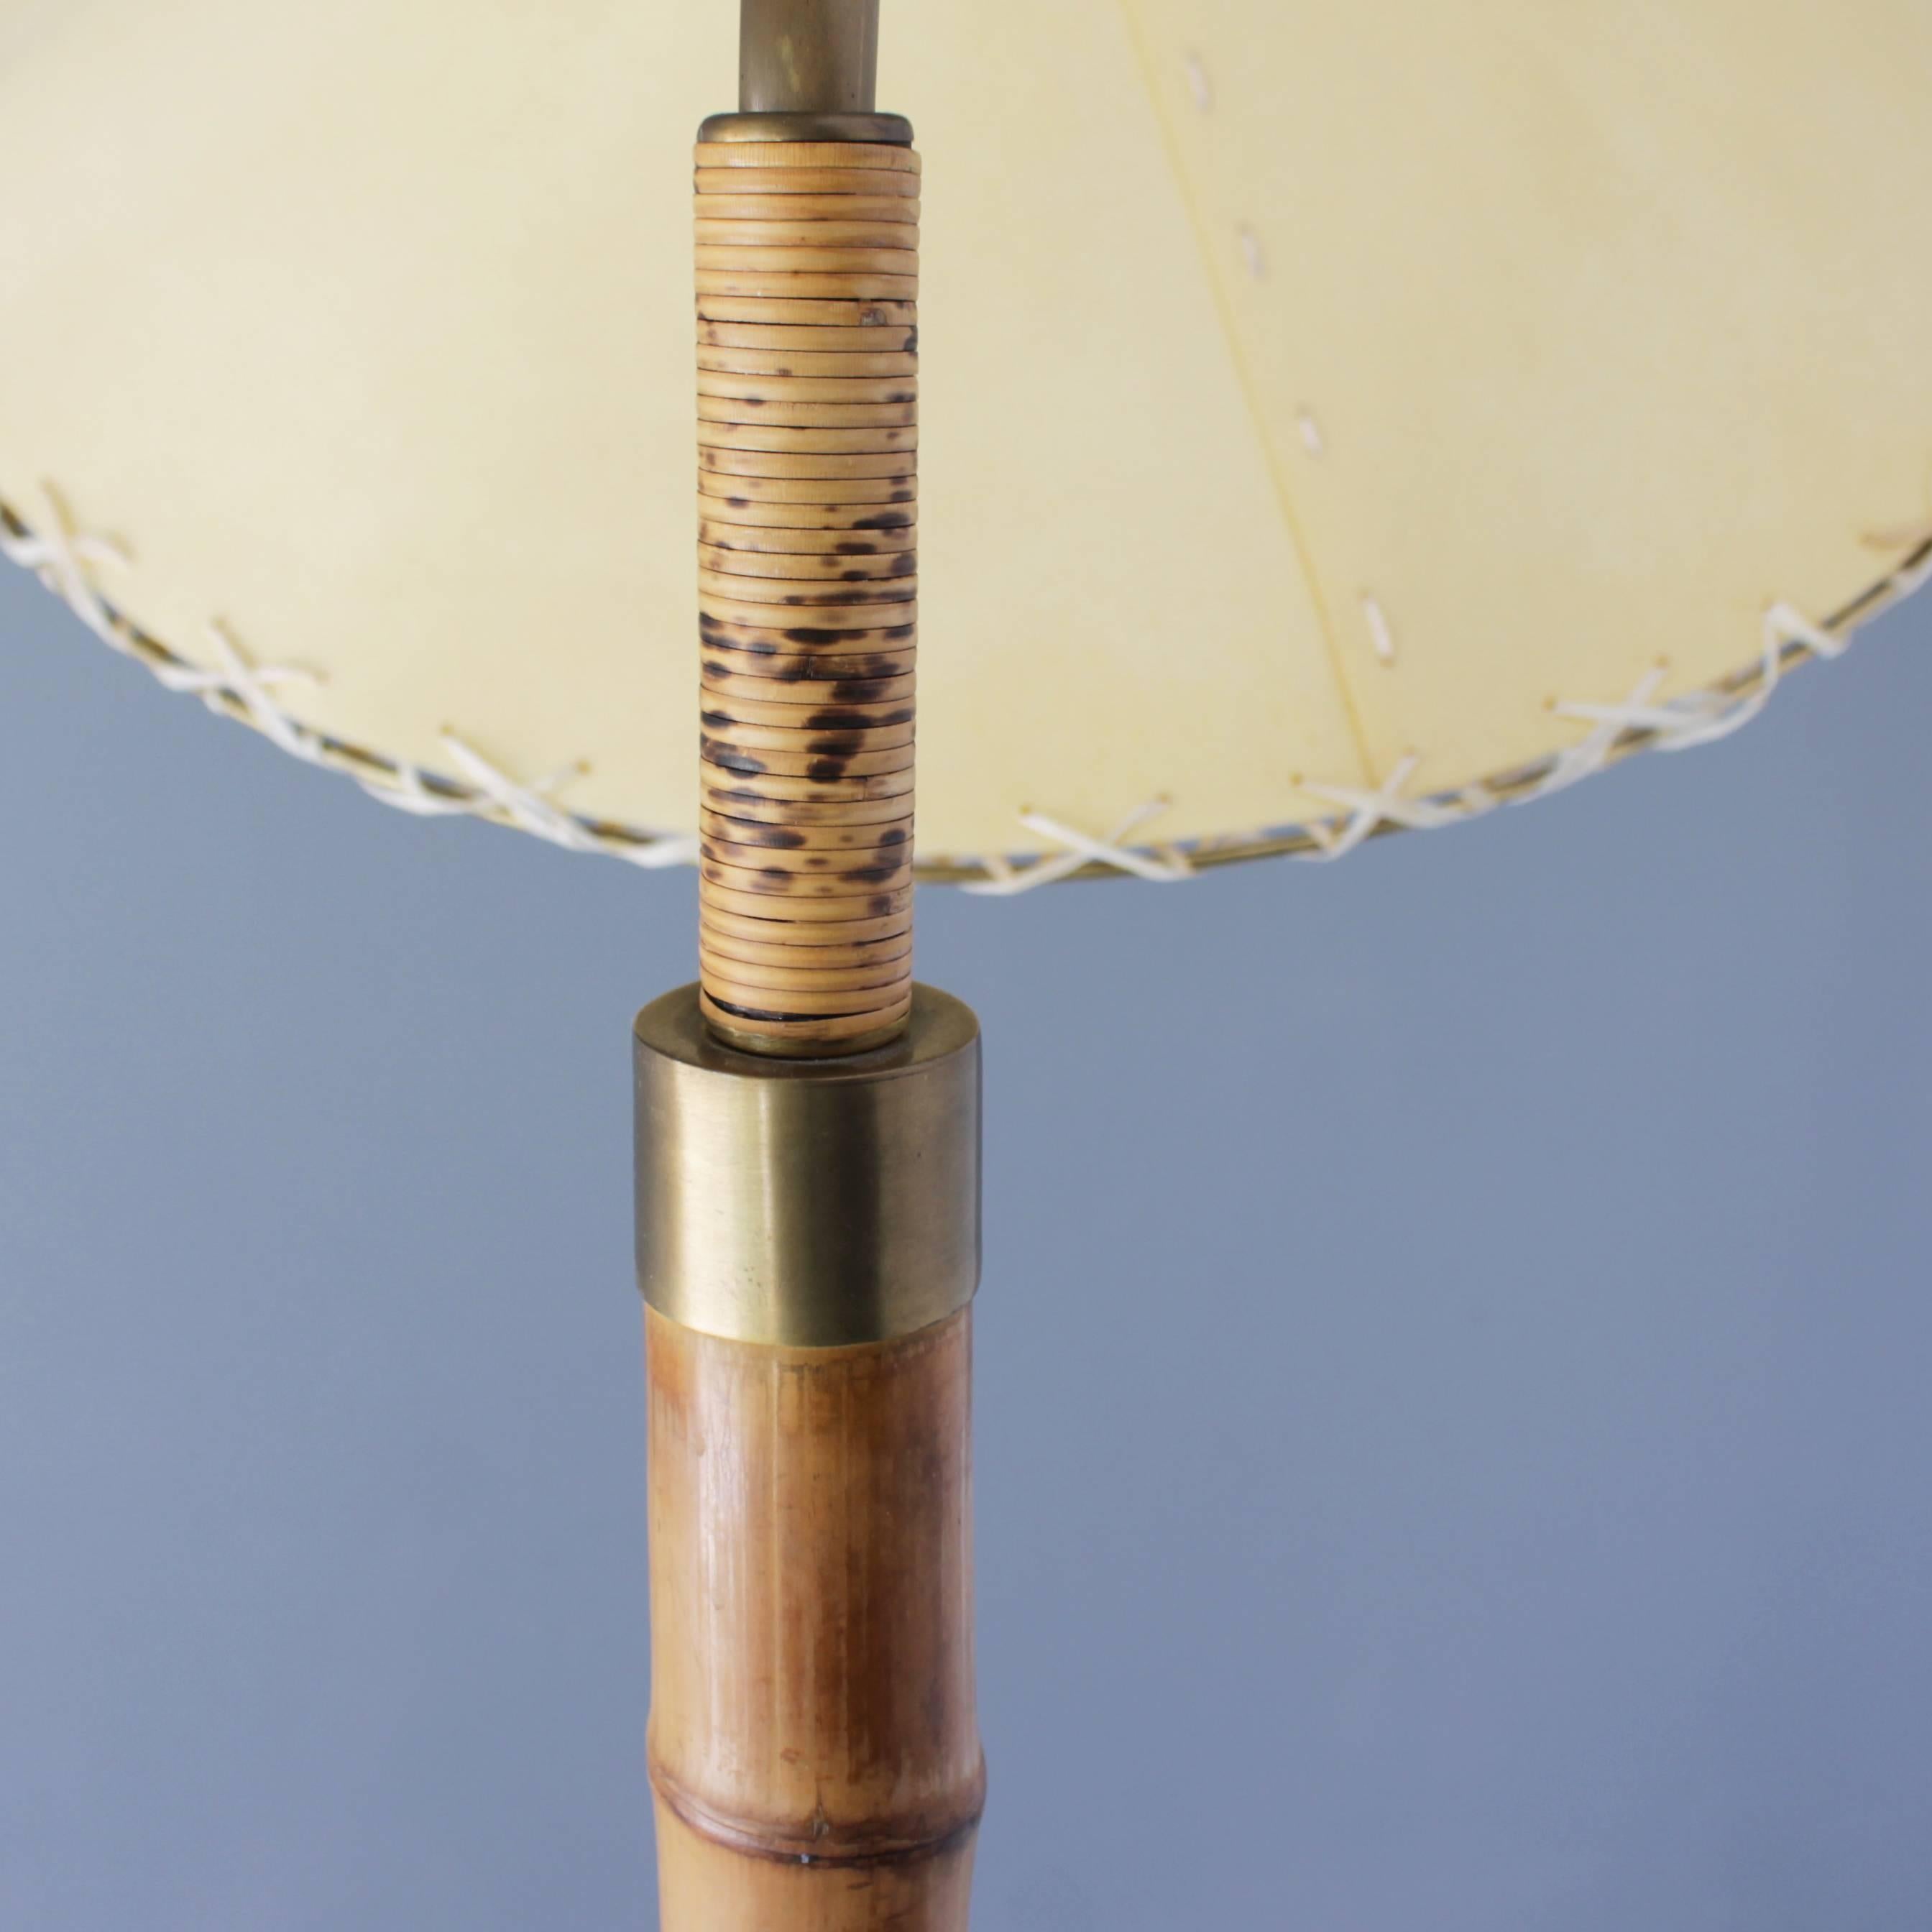 Bamboo Floor Lamp by Pitt Müller Germany from the 1950s